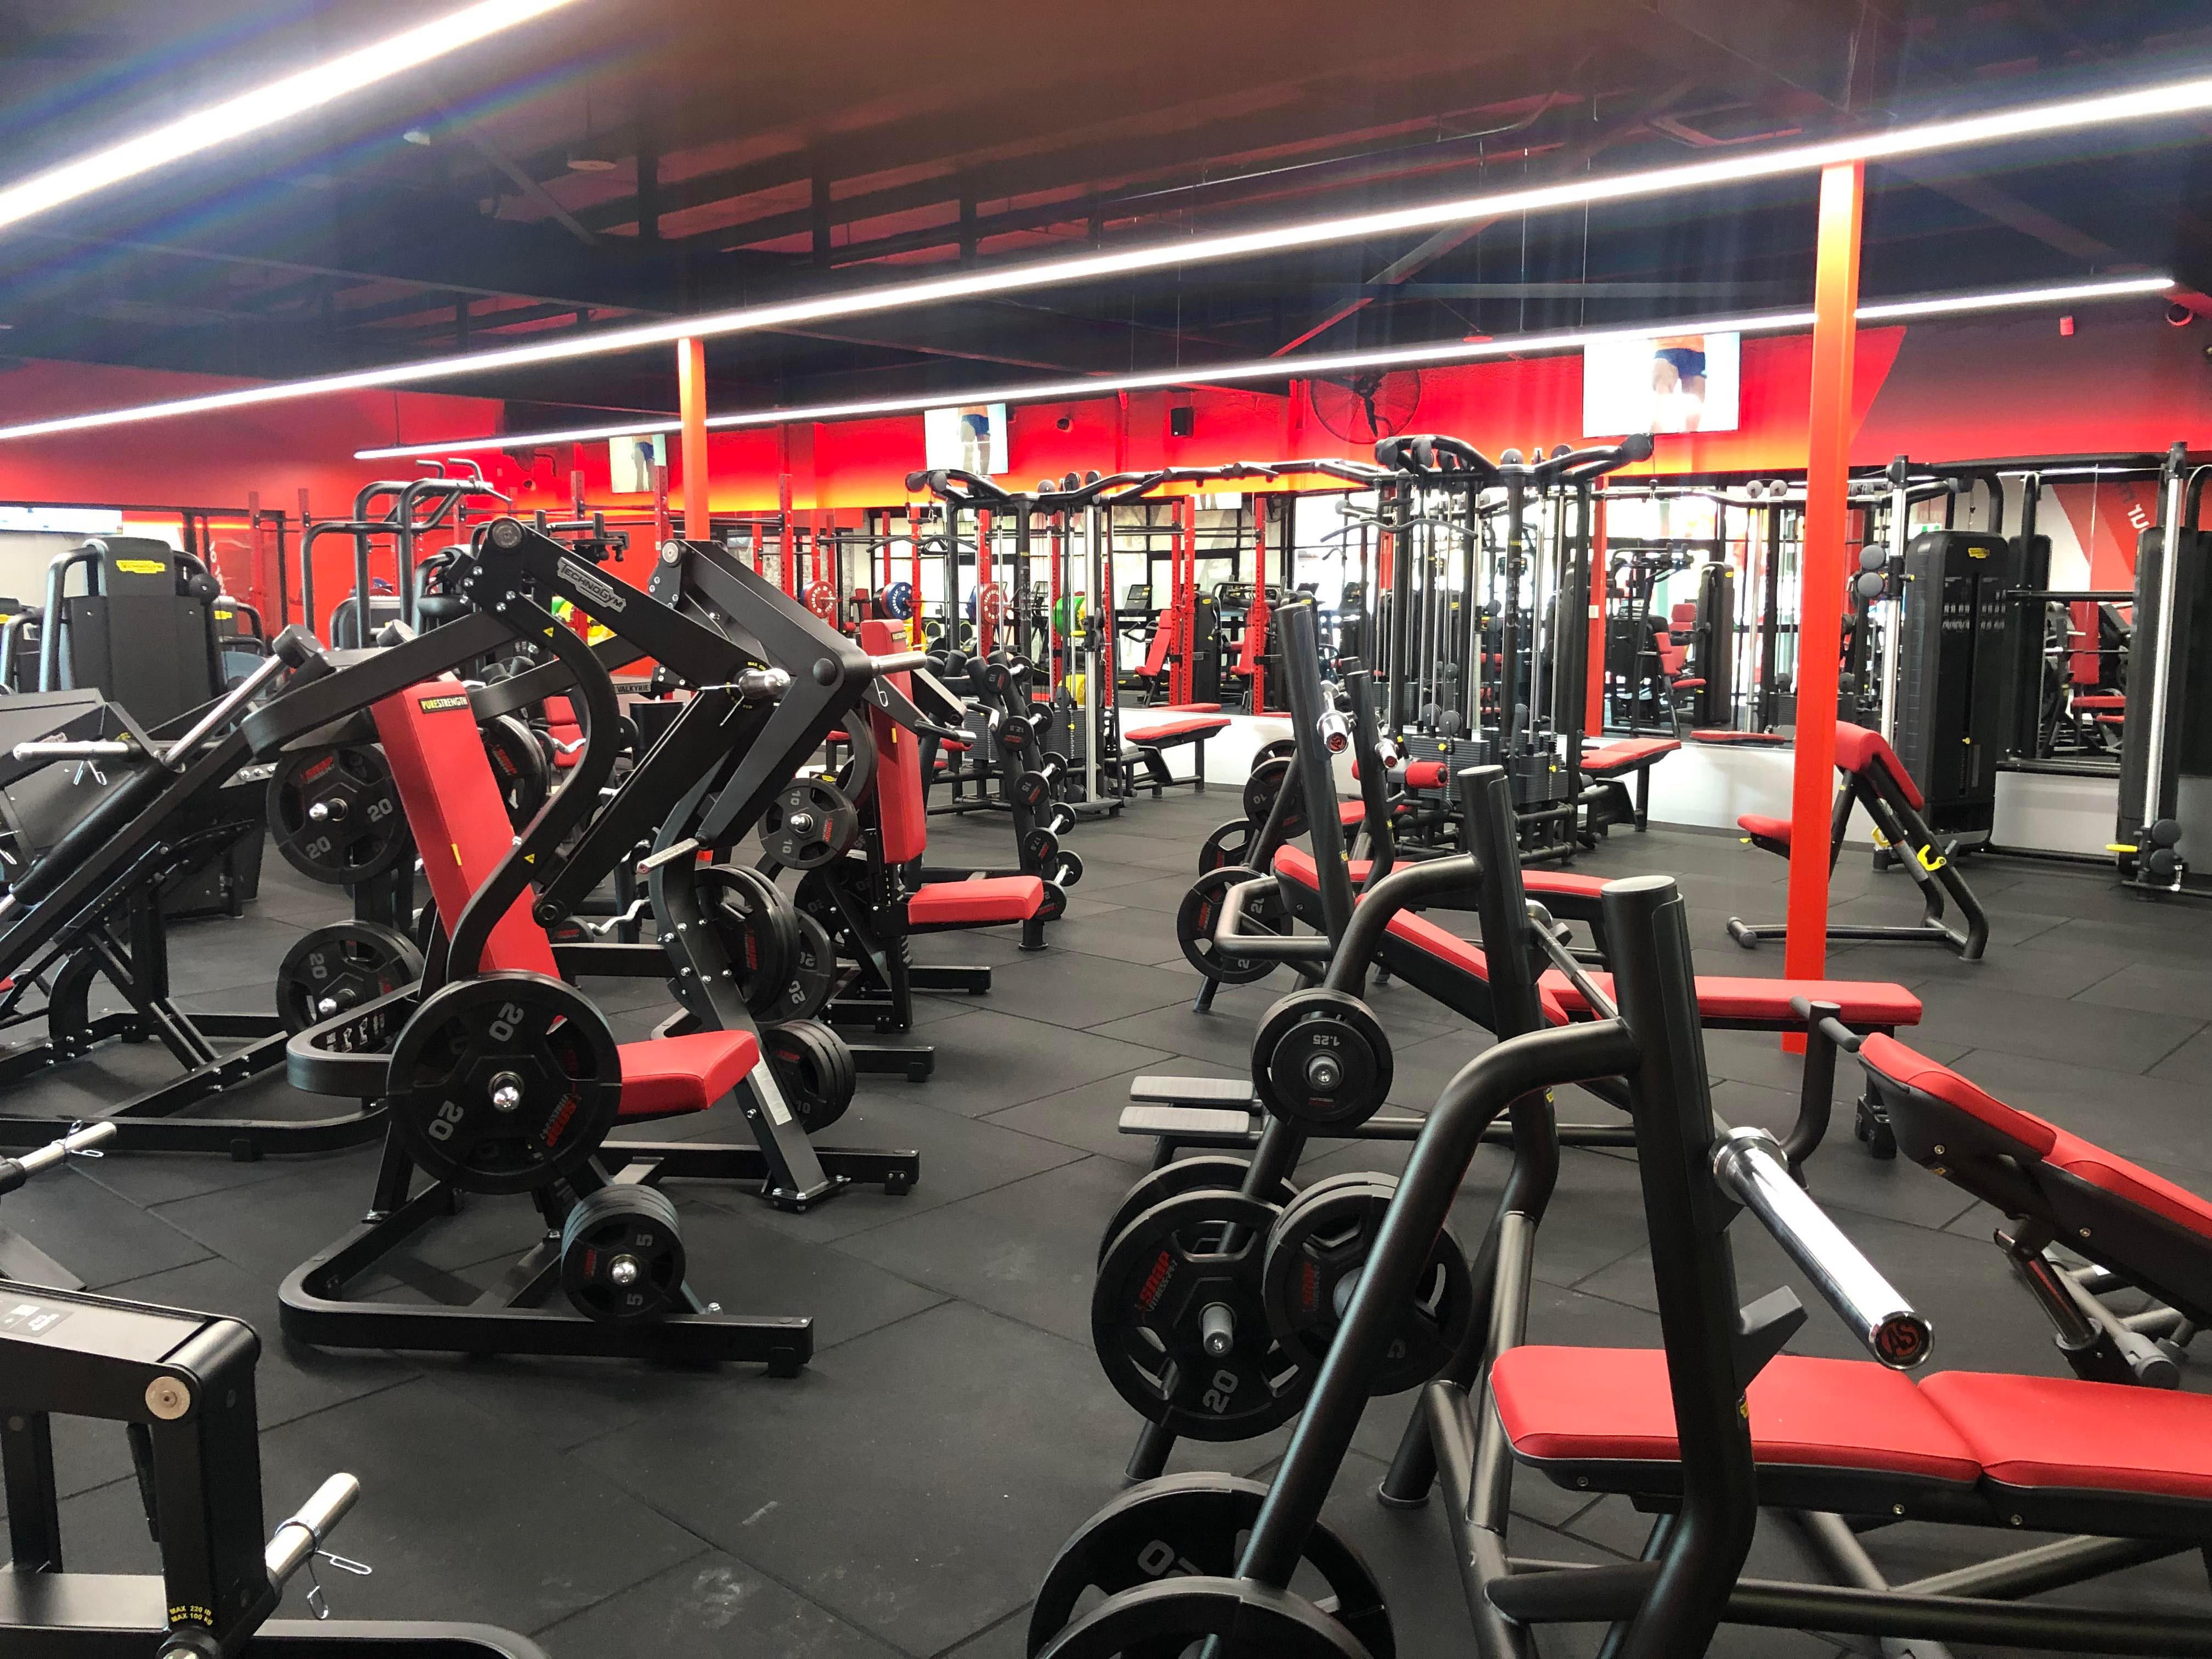 Large Weights Floor Snap Fitness 24/7 Mayfield Mayfield 0422 426 596